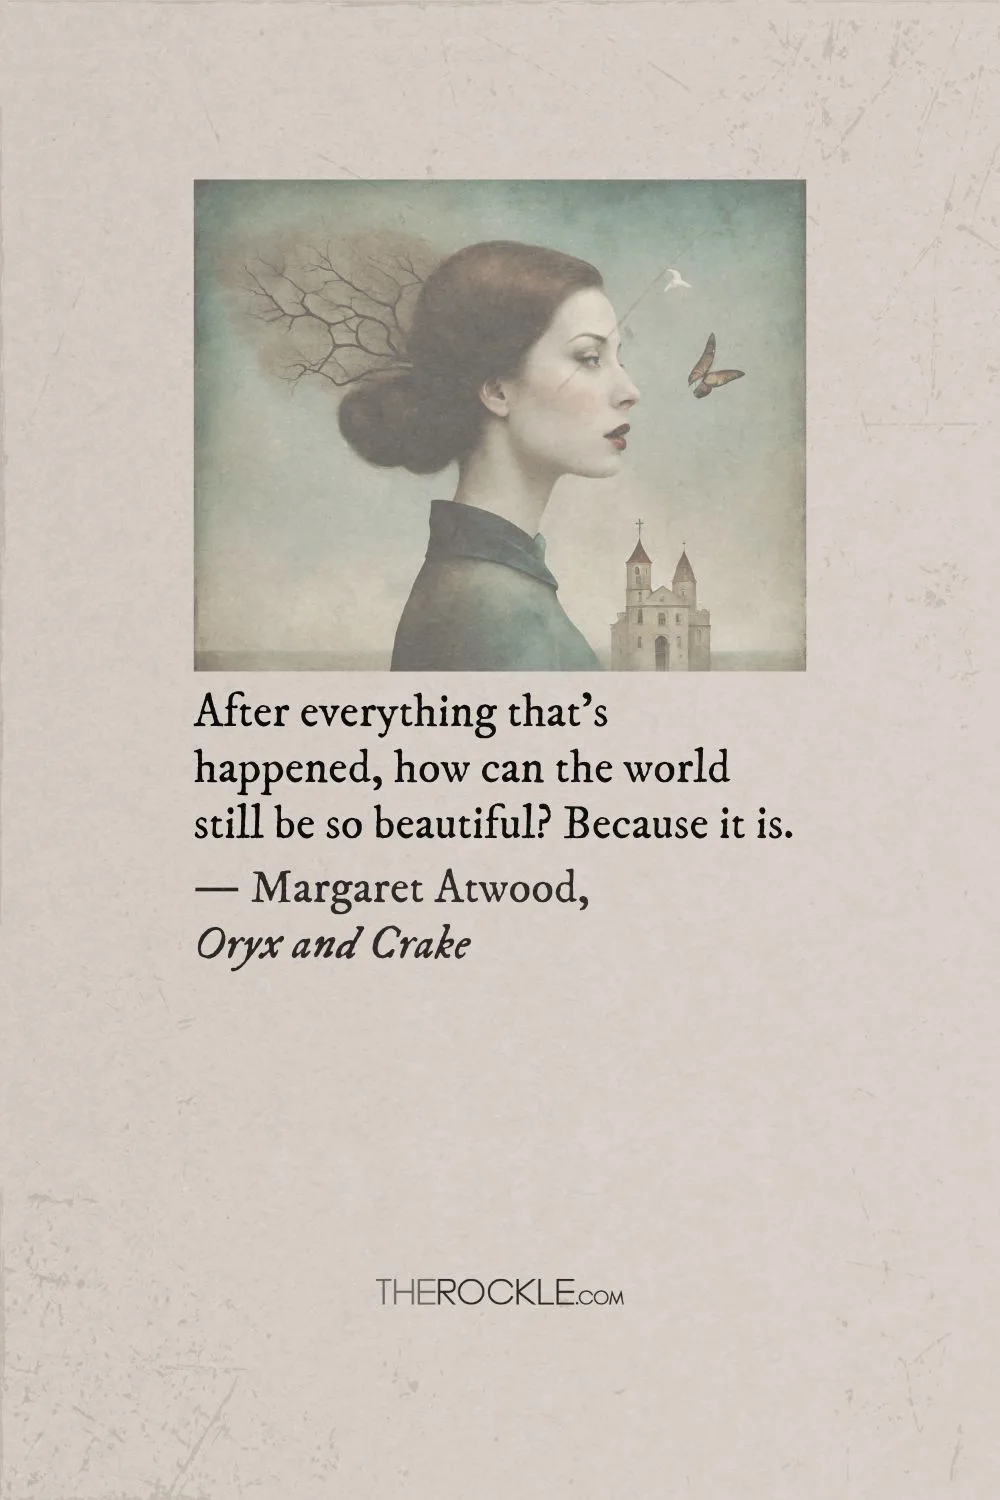 Margaret Atwood on the beauty of the world